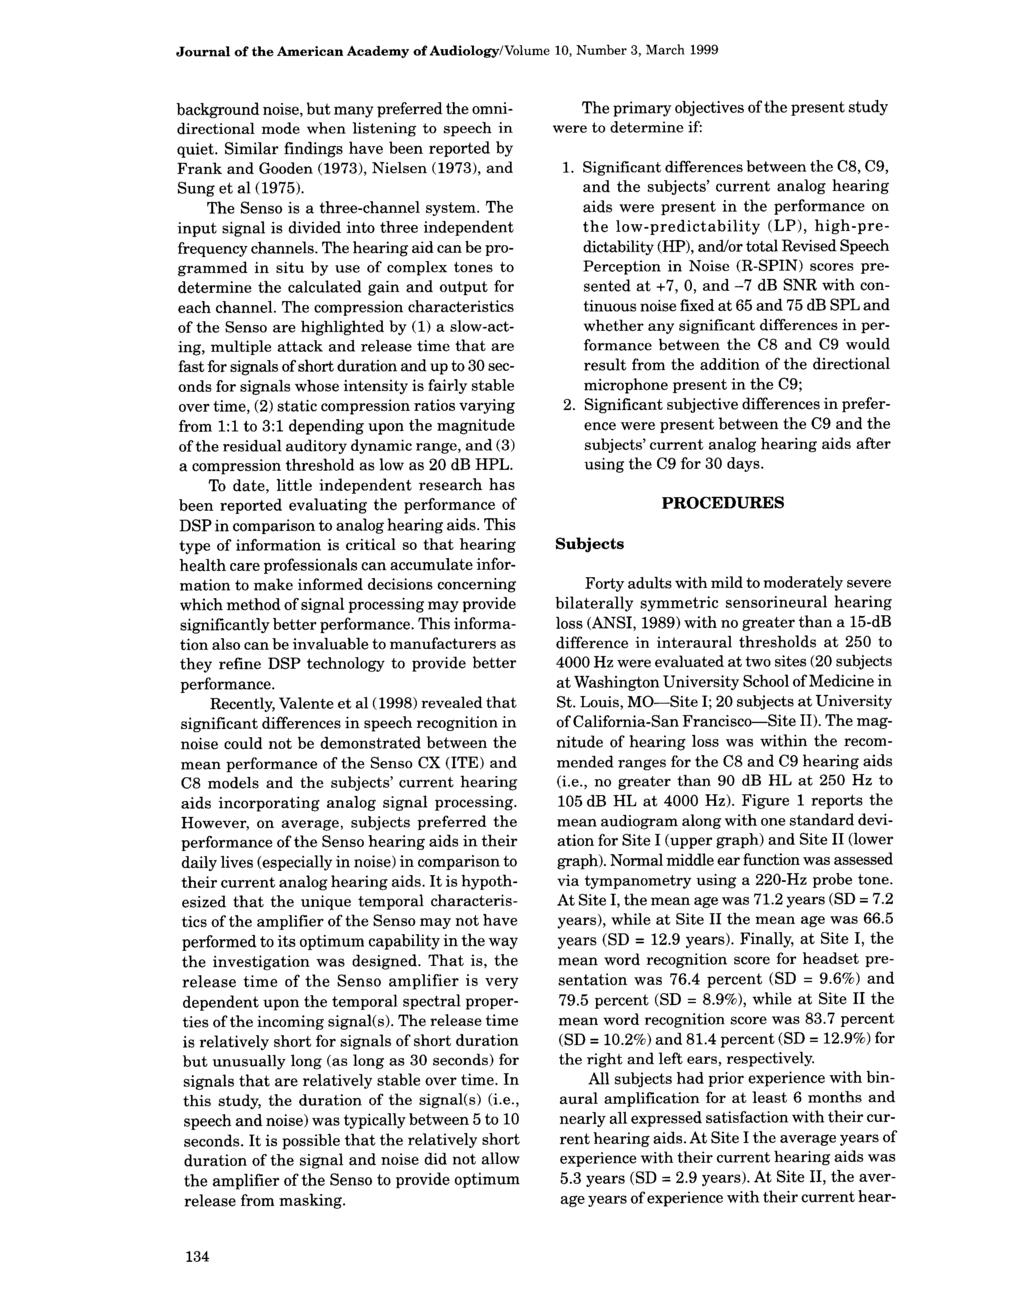 Journal of the American Academy of Audiology/Volume 10, Number 3, March 1999 background noise, but many preferred the omnidirectional mode when listening to speech in quiet.